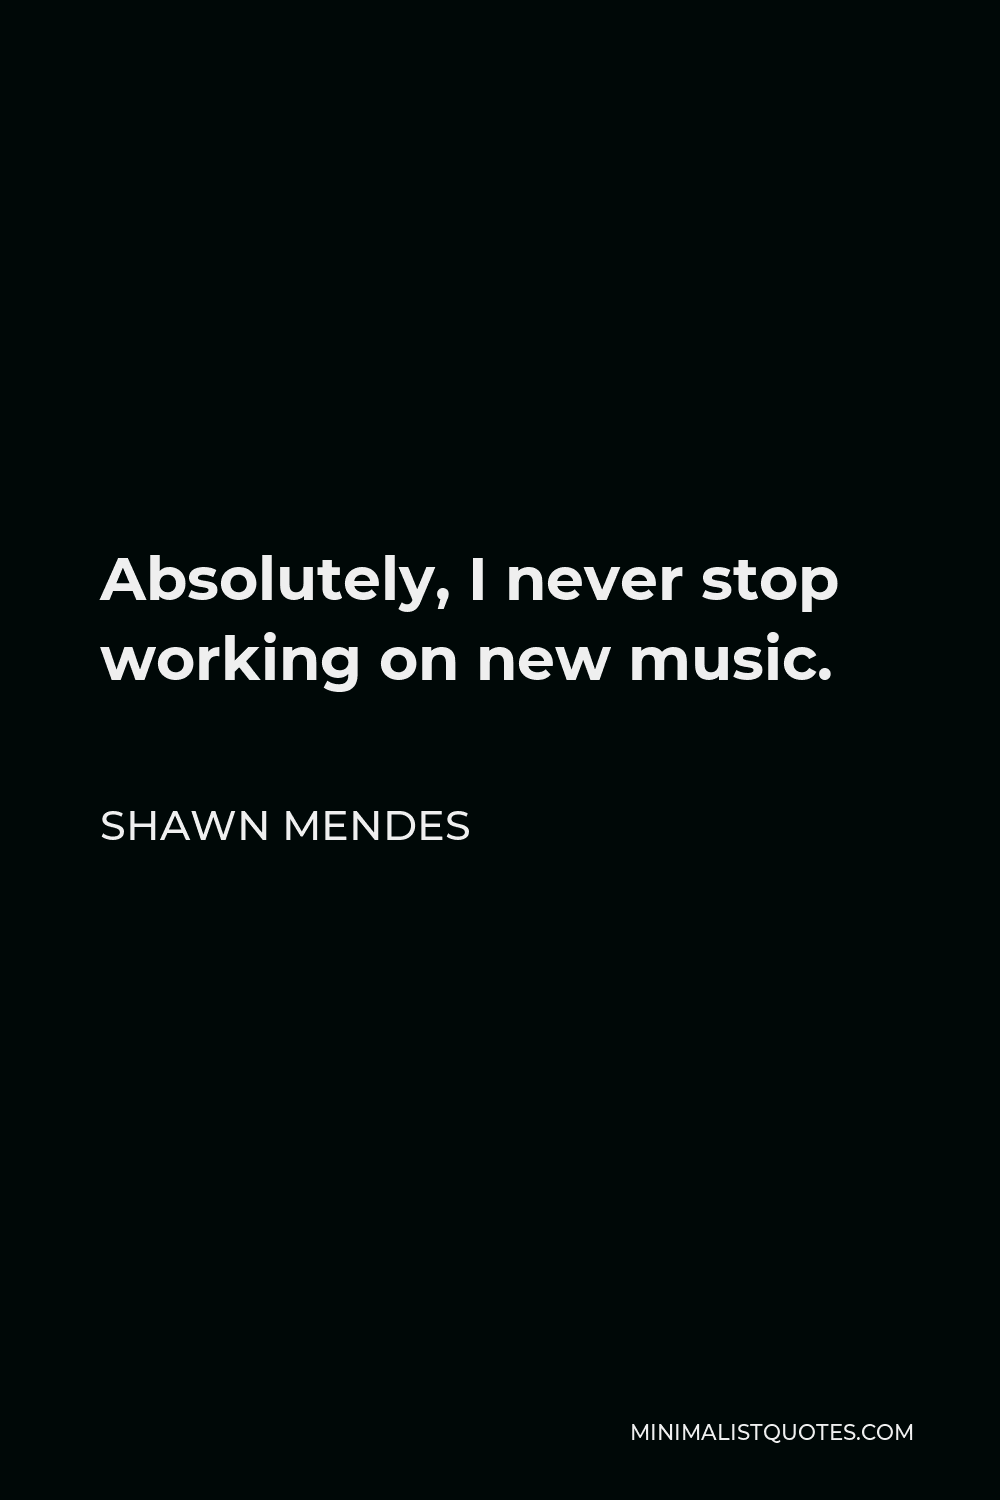 Shawn Mendes Quote - Absolutely, I never stop working on new music.